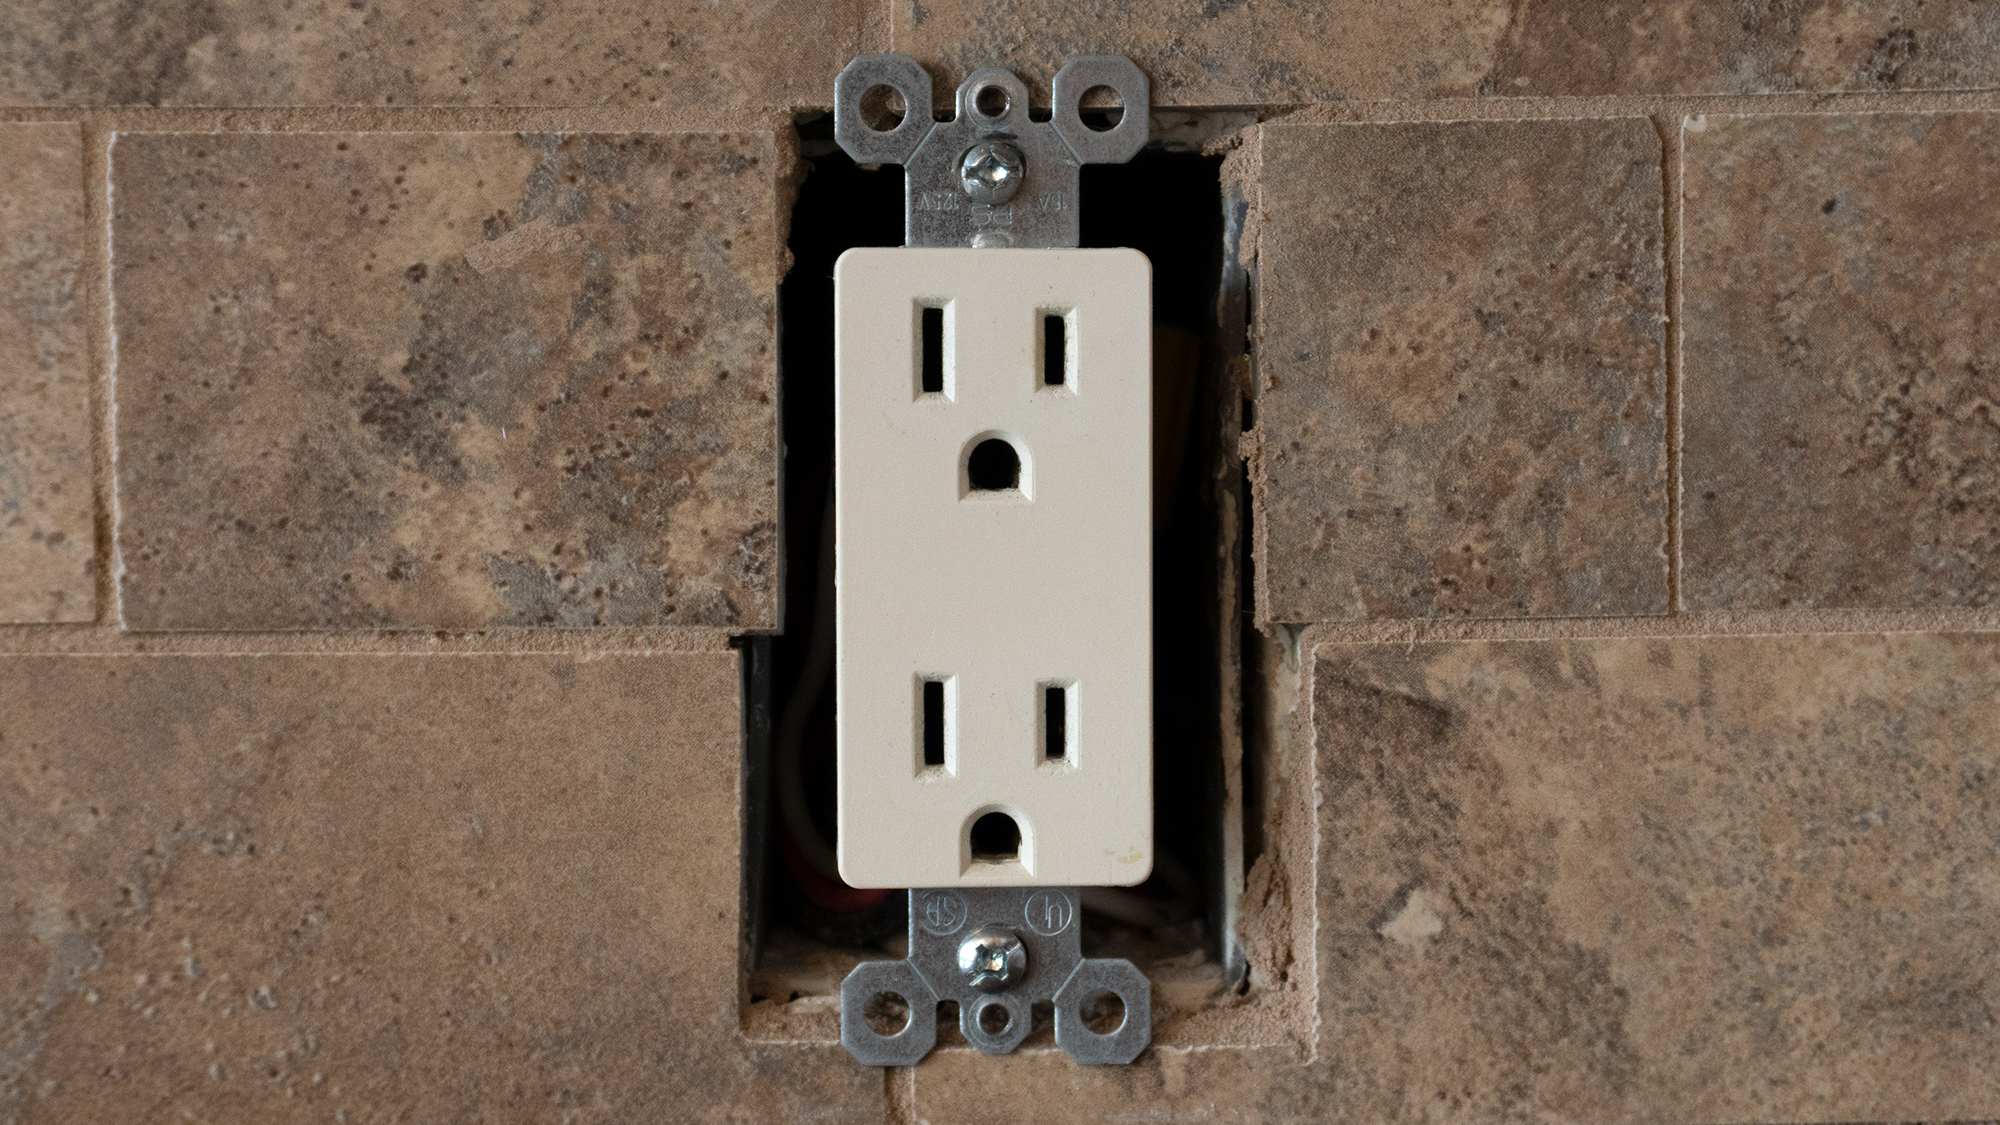 It's not a bad idea to first ensure your outlet is compatible with the ConnectLight by checking the space on either side of the outlet with its cover removed. (Photo: Andrew Liszewski/Gizmodo)